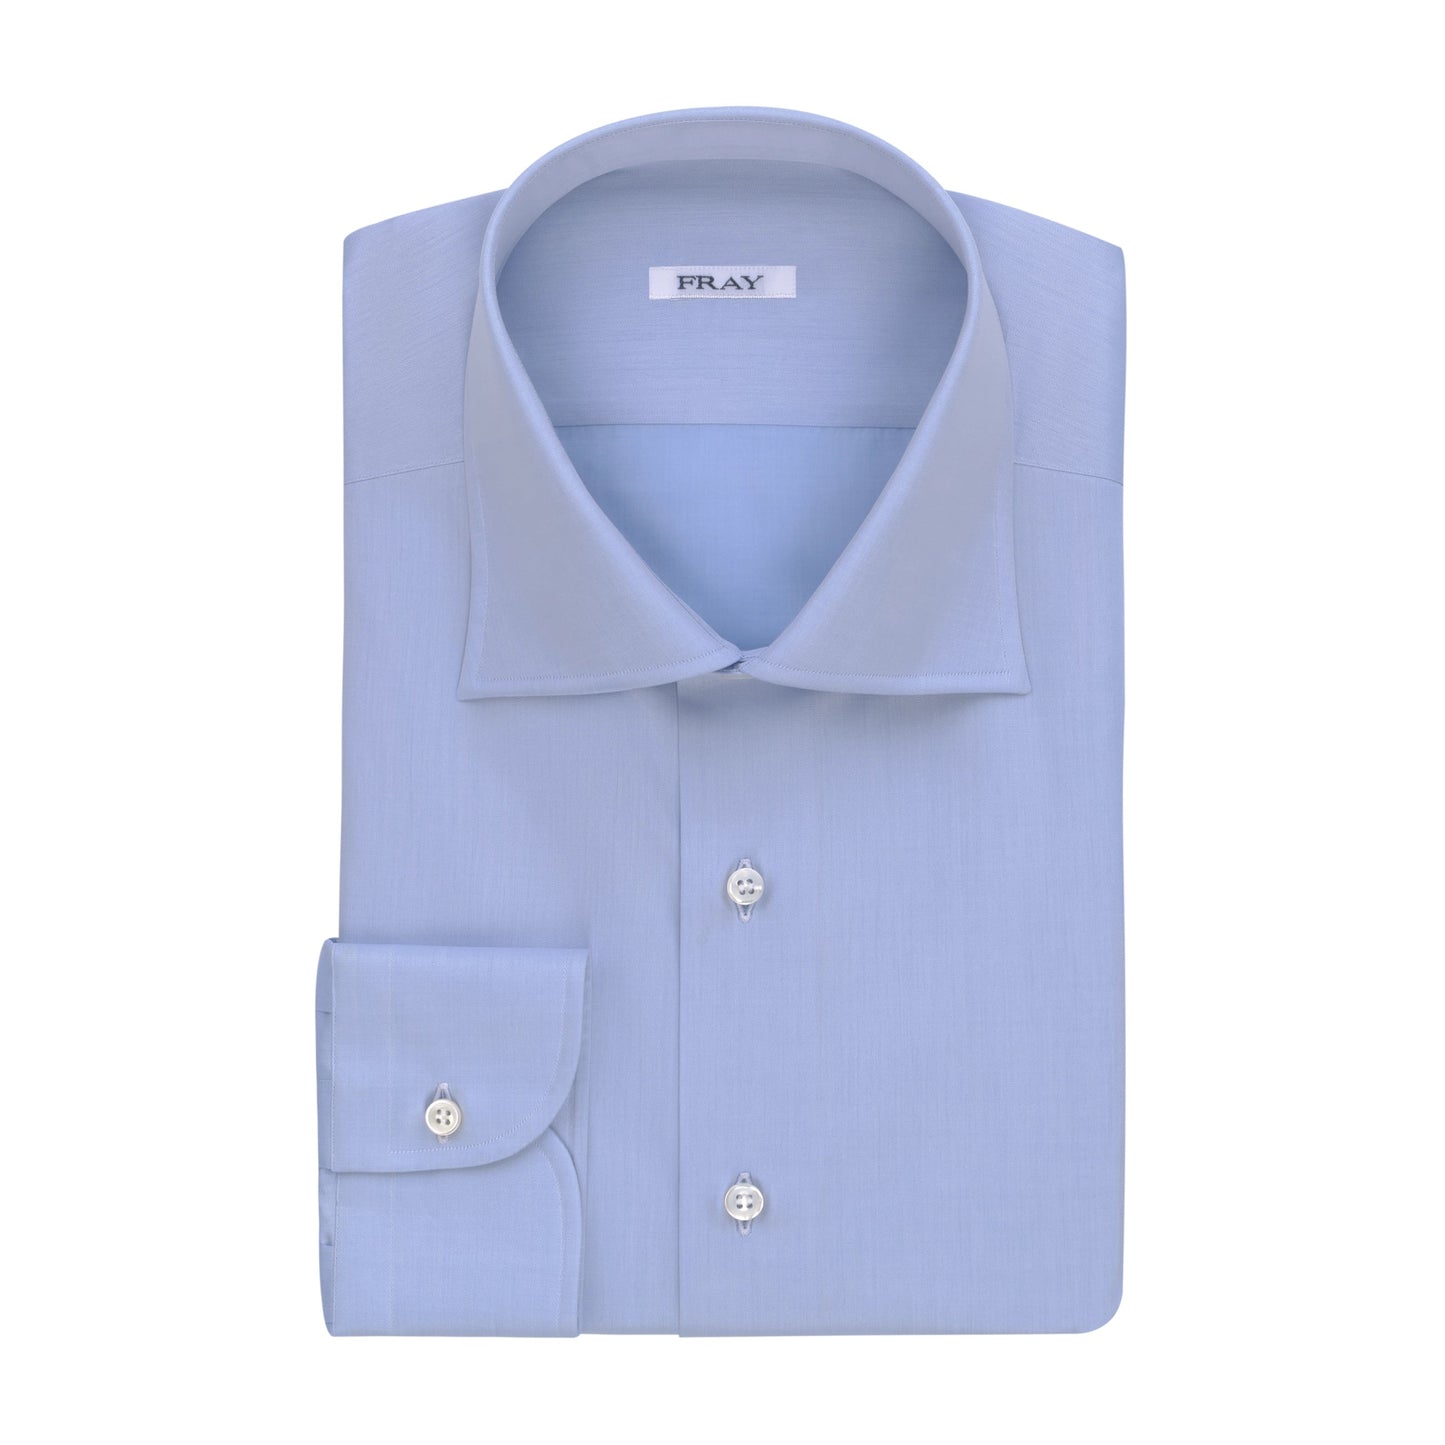 Fray Classic Cotton Shirt in Light Blue with Spread Collar - SARTALE